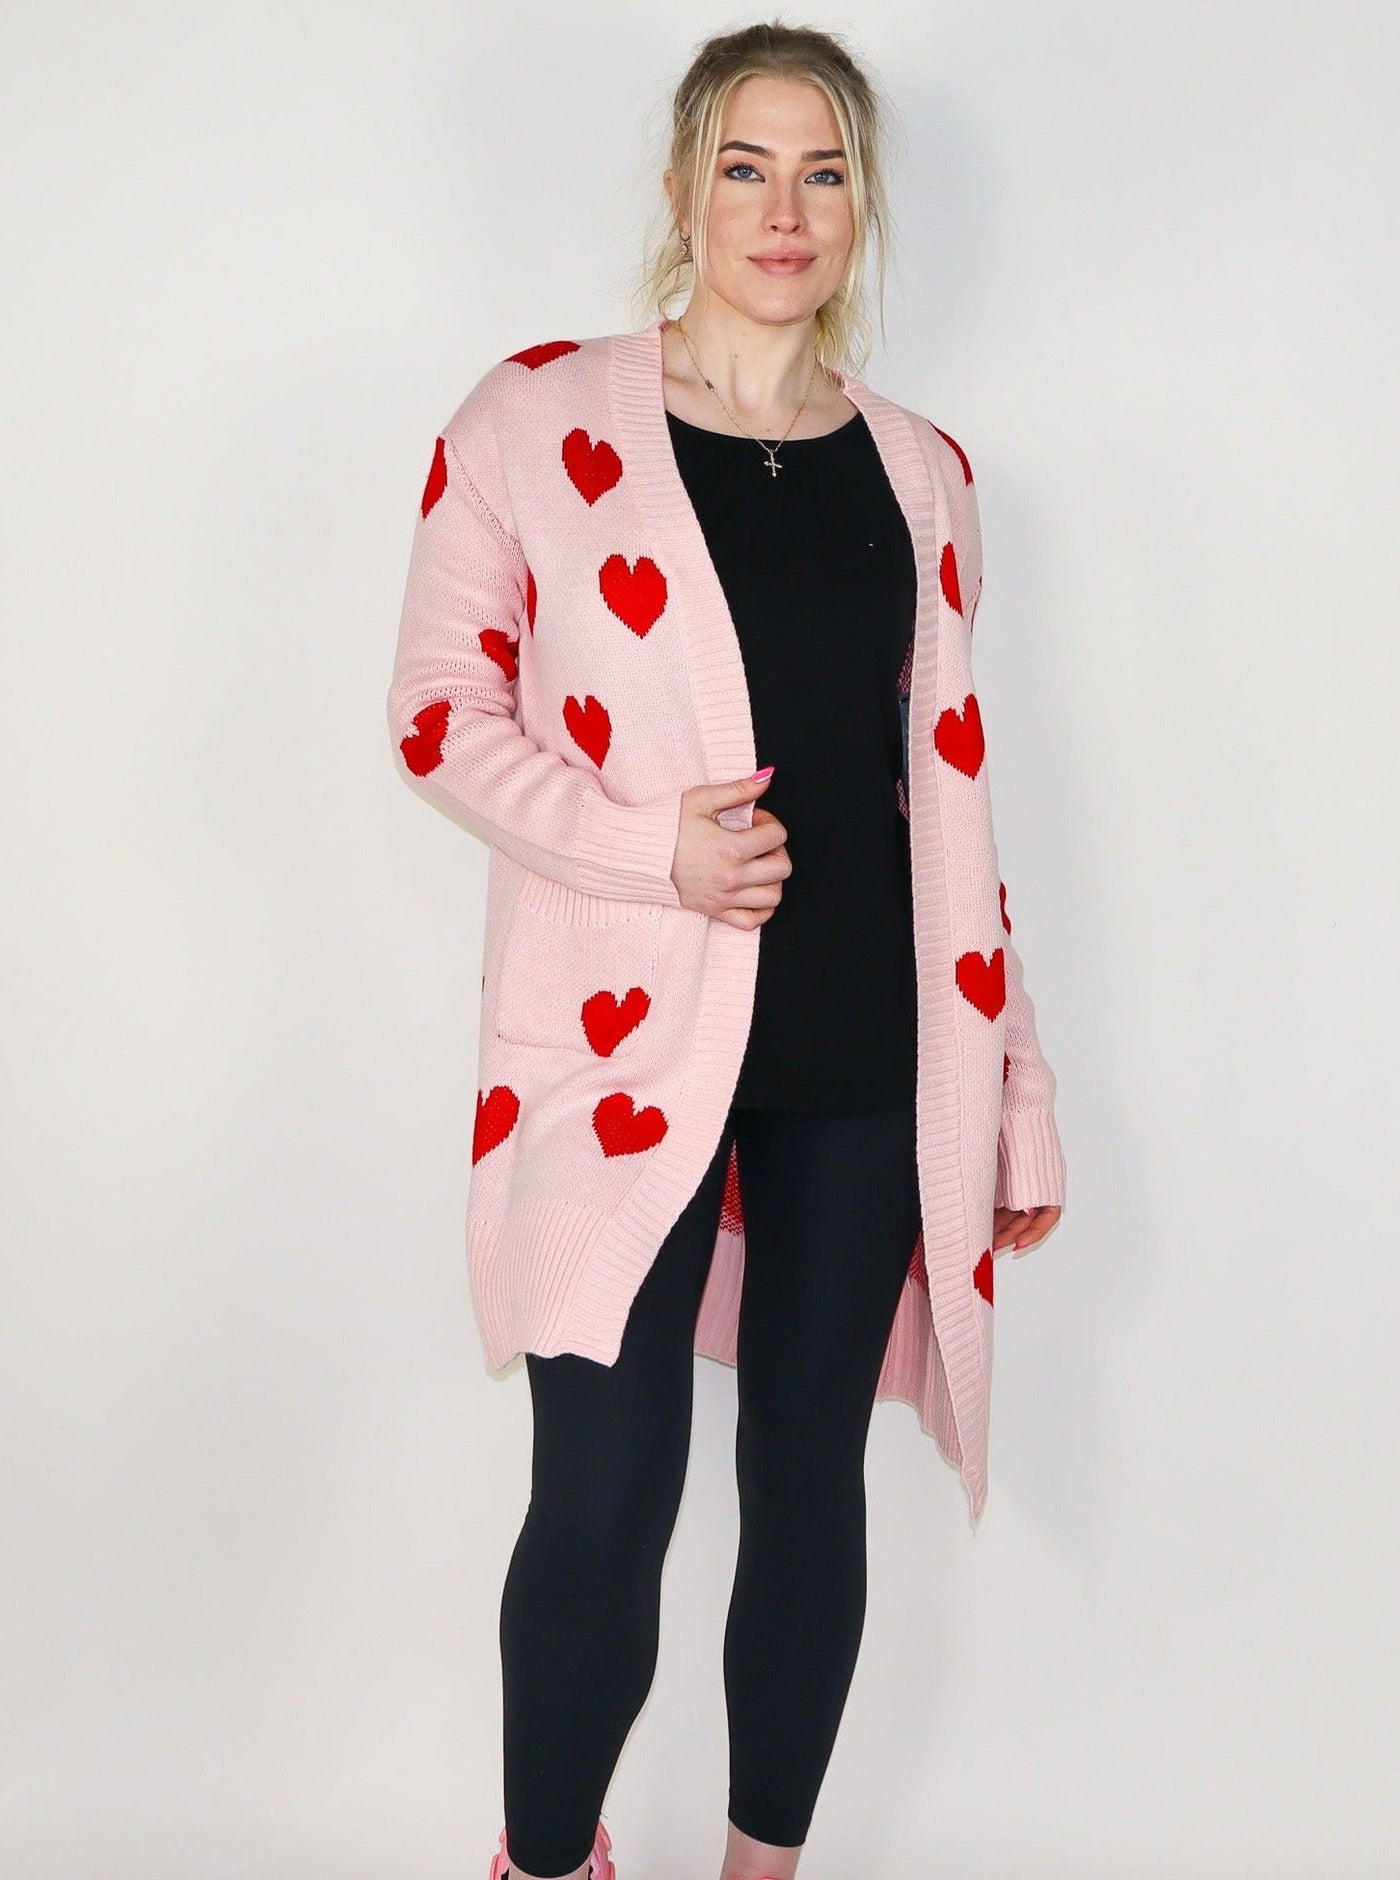 Model is wearing a midi length pink cardigan with red hearts. Cardigan is paired with a black tank top and black leggings. 